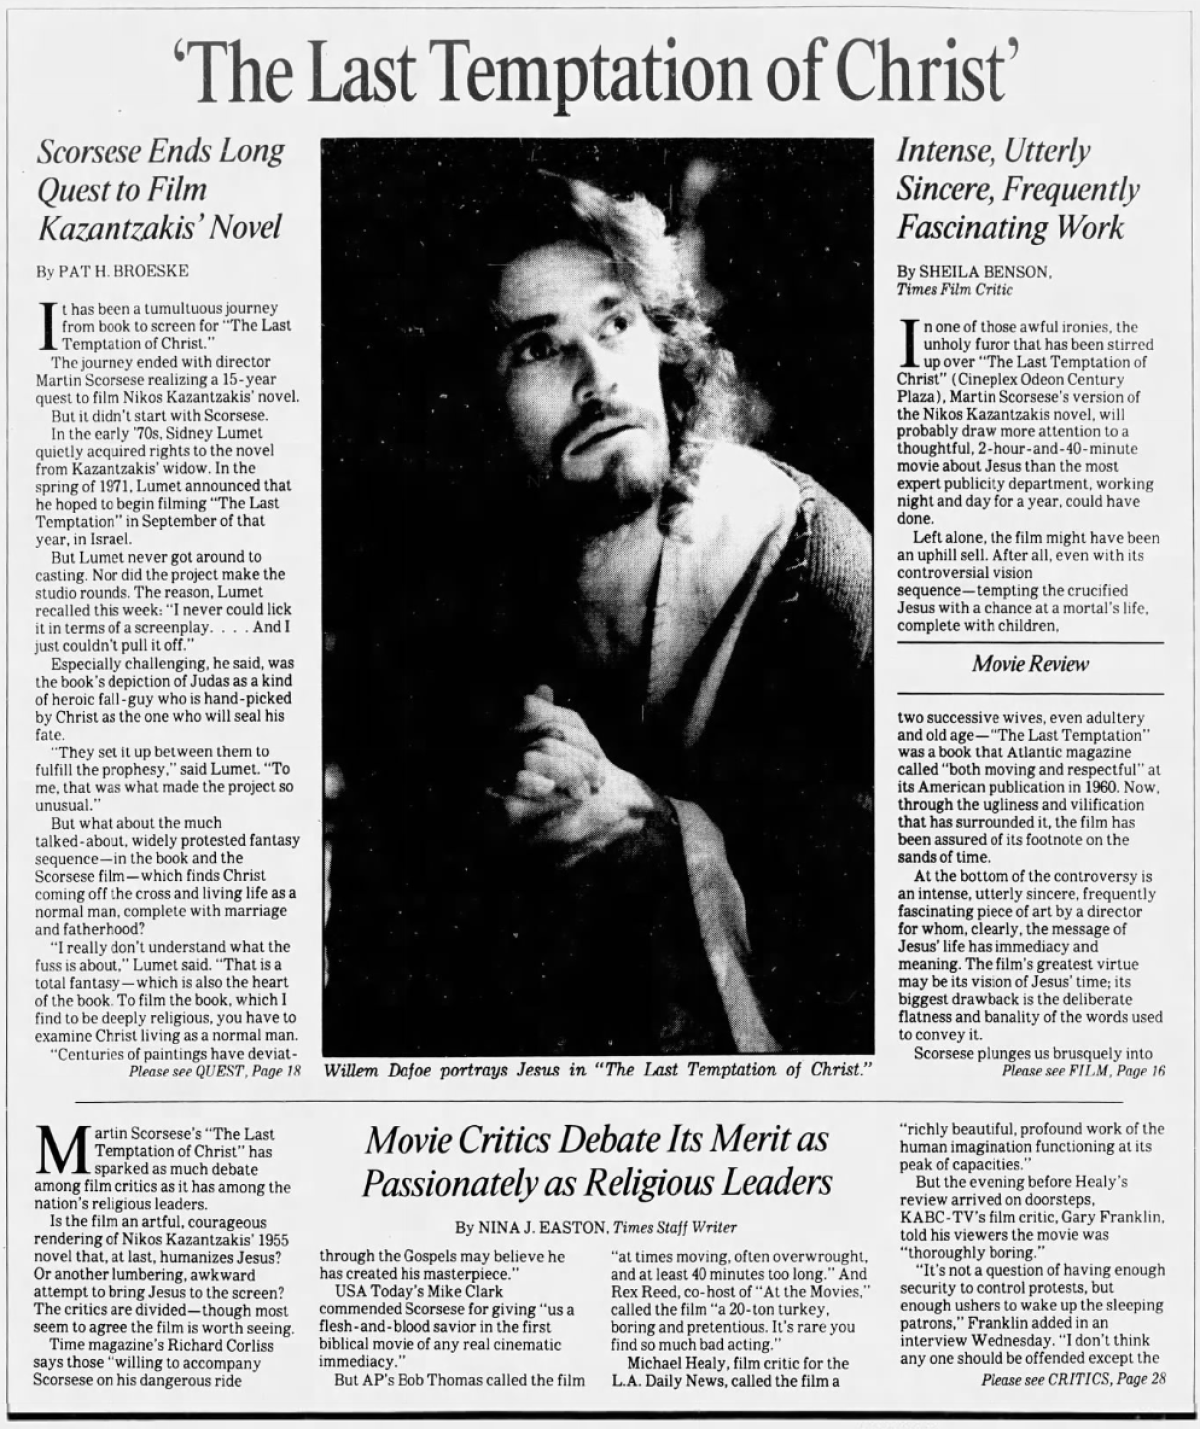 The August 12, 1988 edition of the Los Angeles Times covered the controversy surrounding "The Last Temptation of Christ"